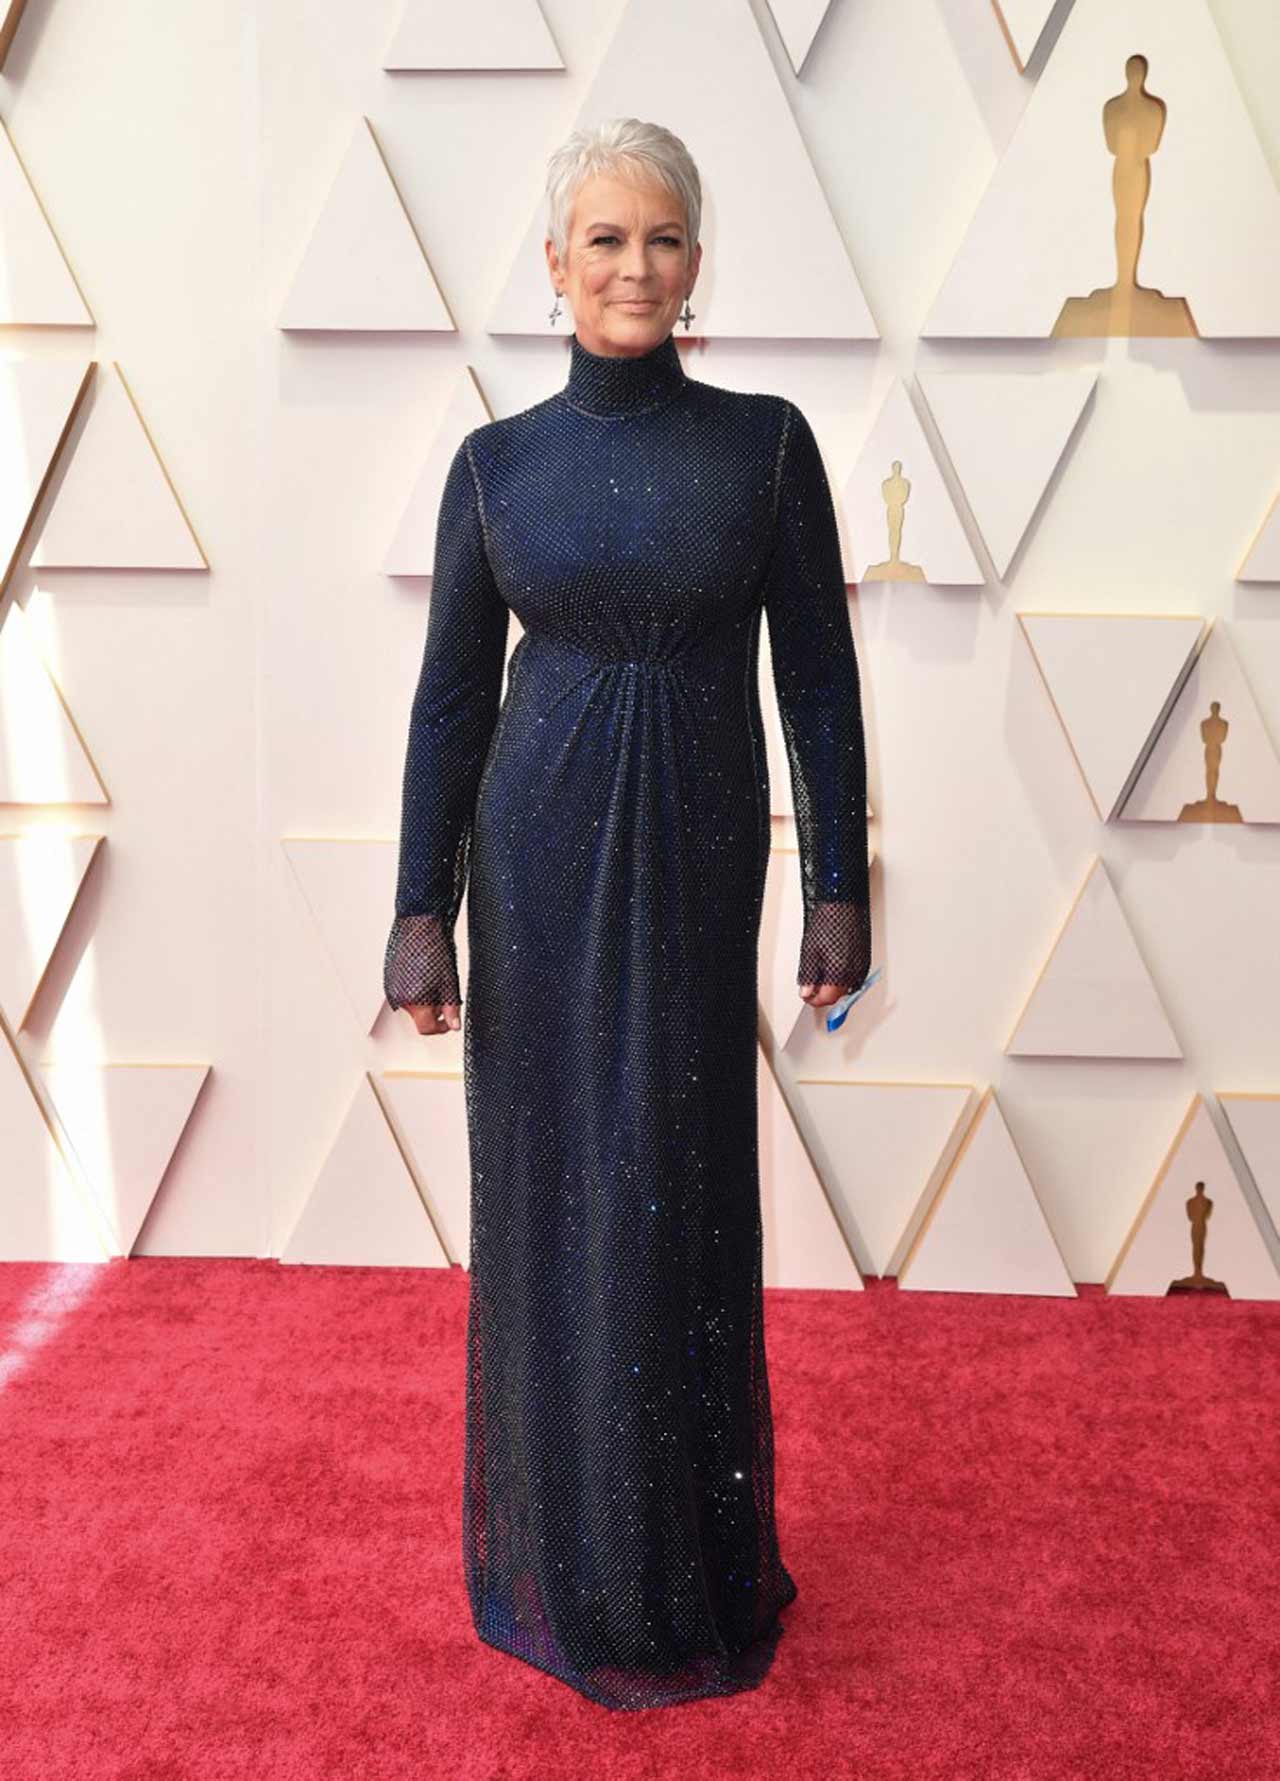 Jamie Lee Curtis appeared in a shimmery midnight blue Stella McCartney dress, showing off a ribbon honouring refugees.